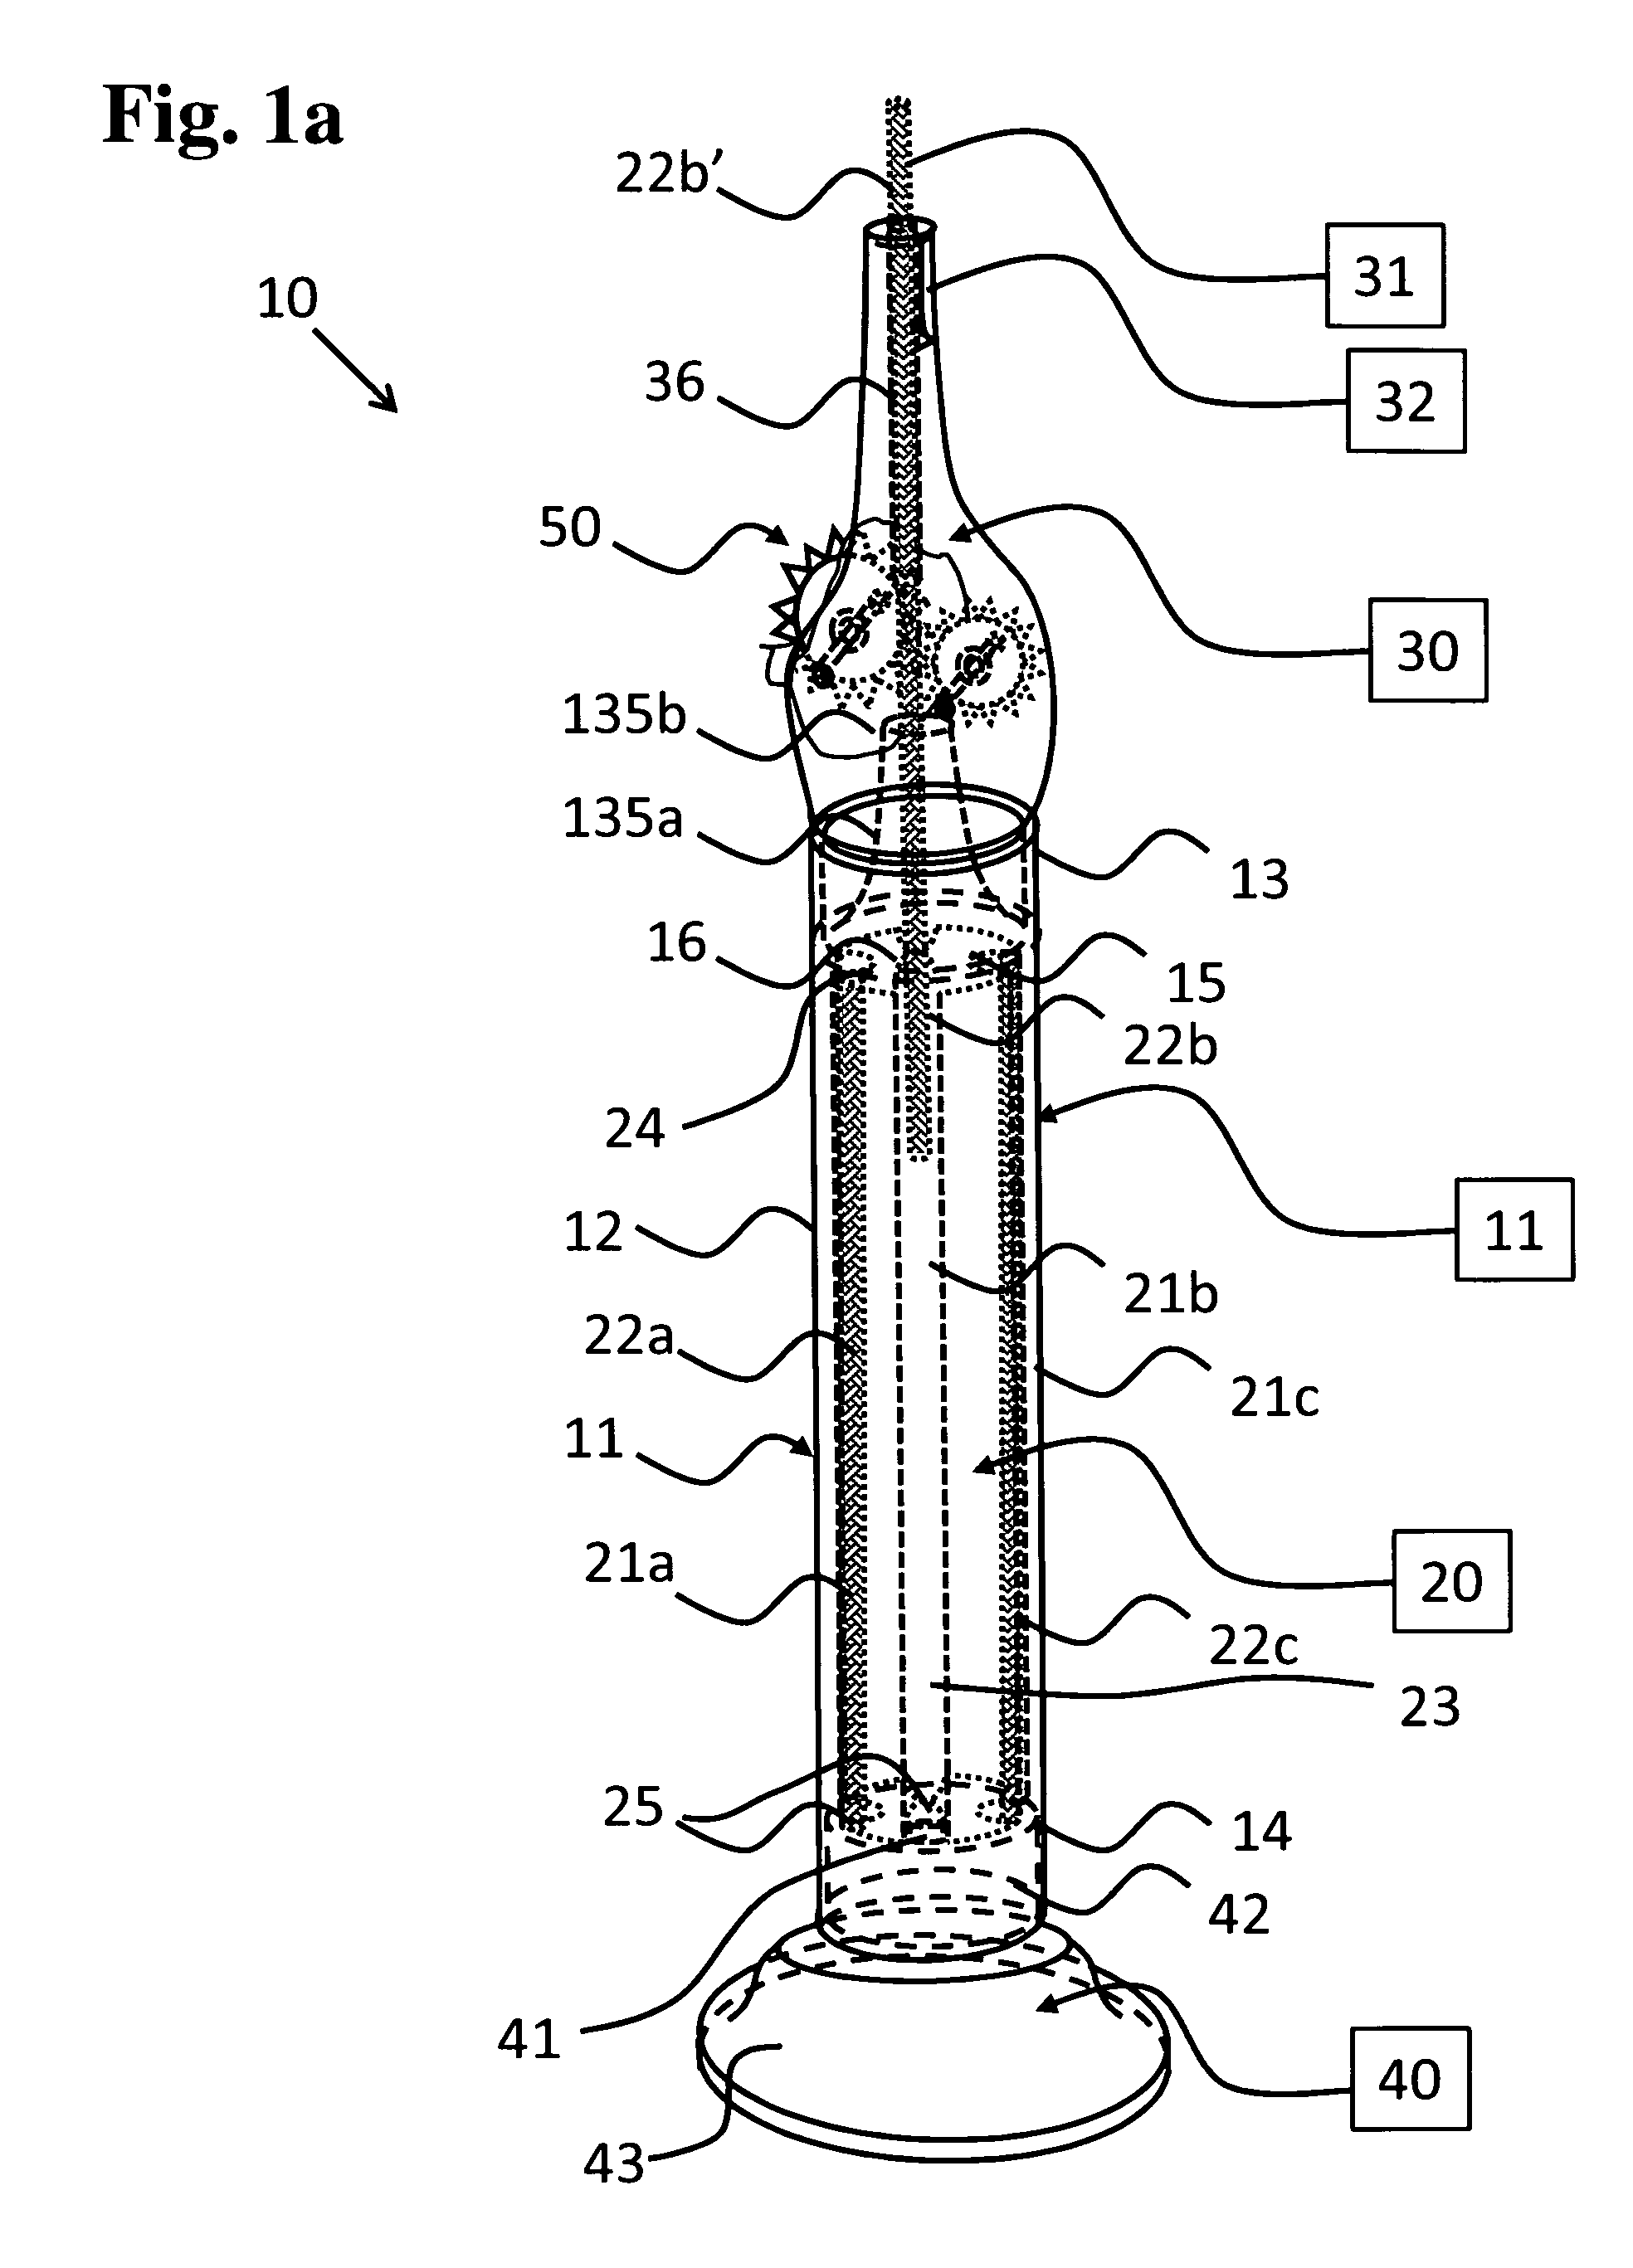 Continuous feed inter-dental brush assembly and device